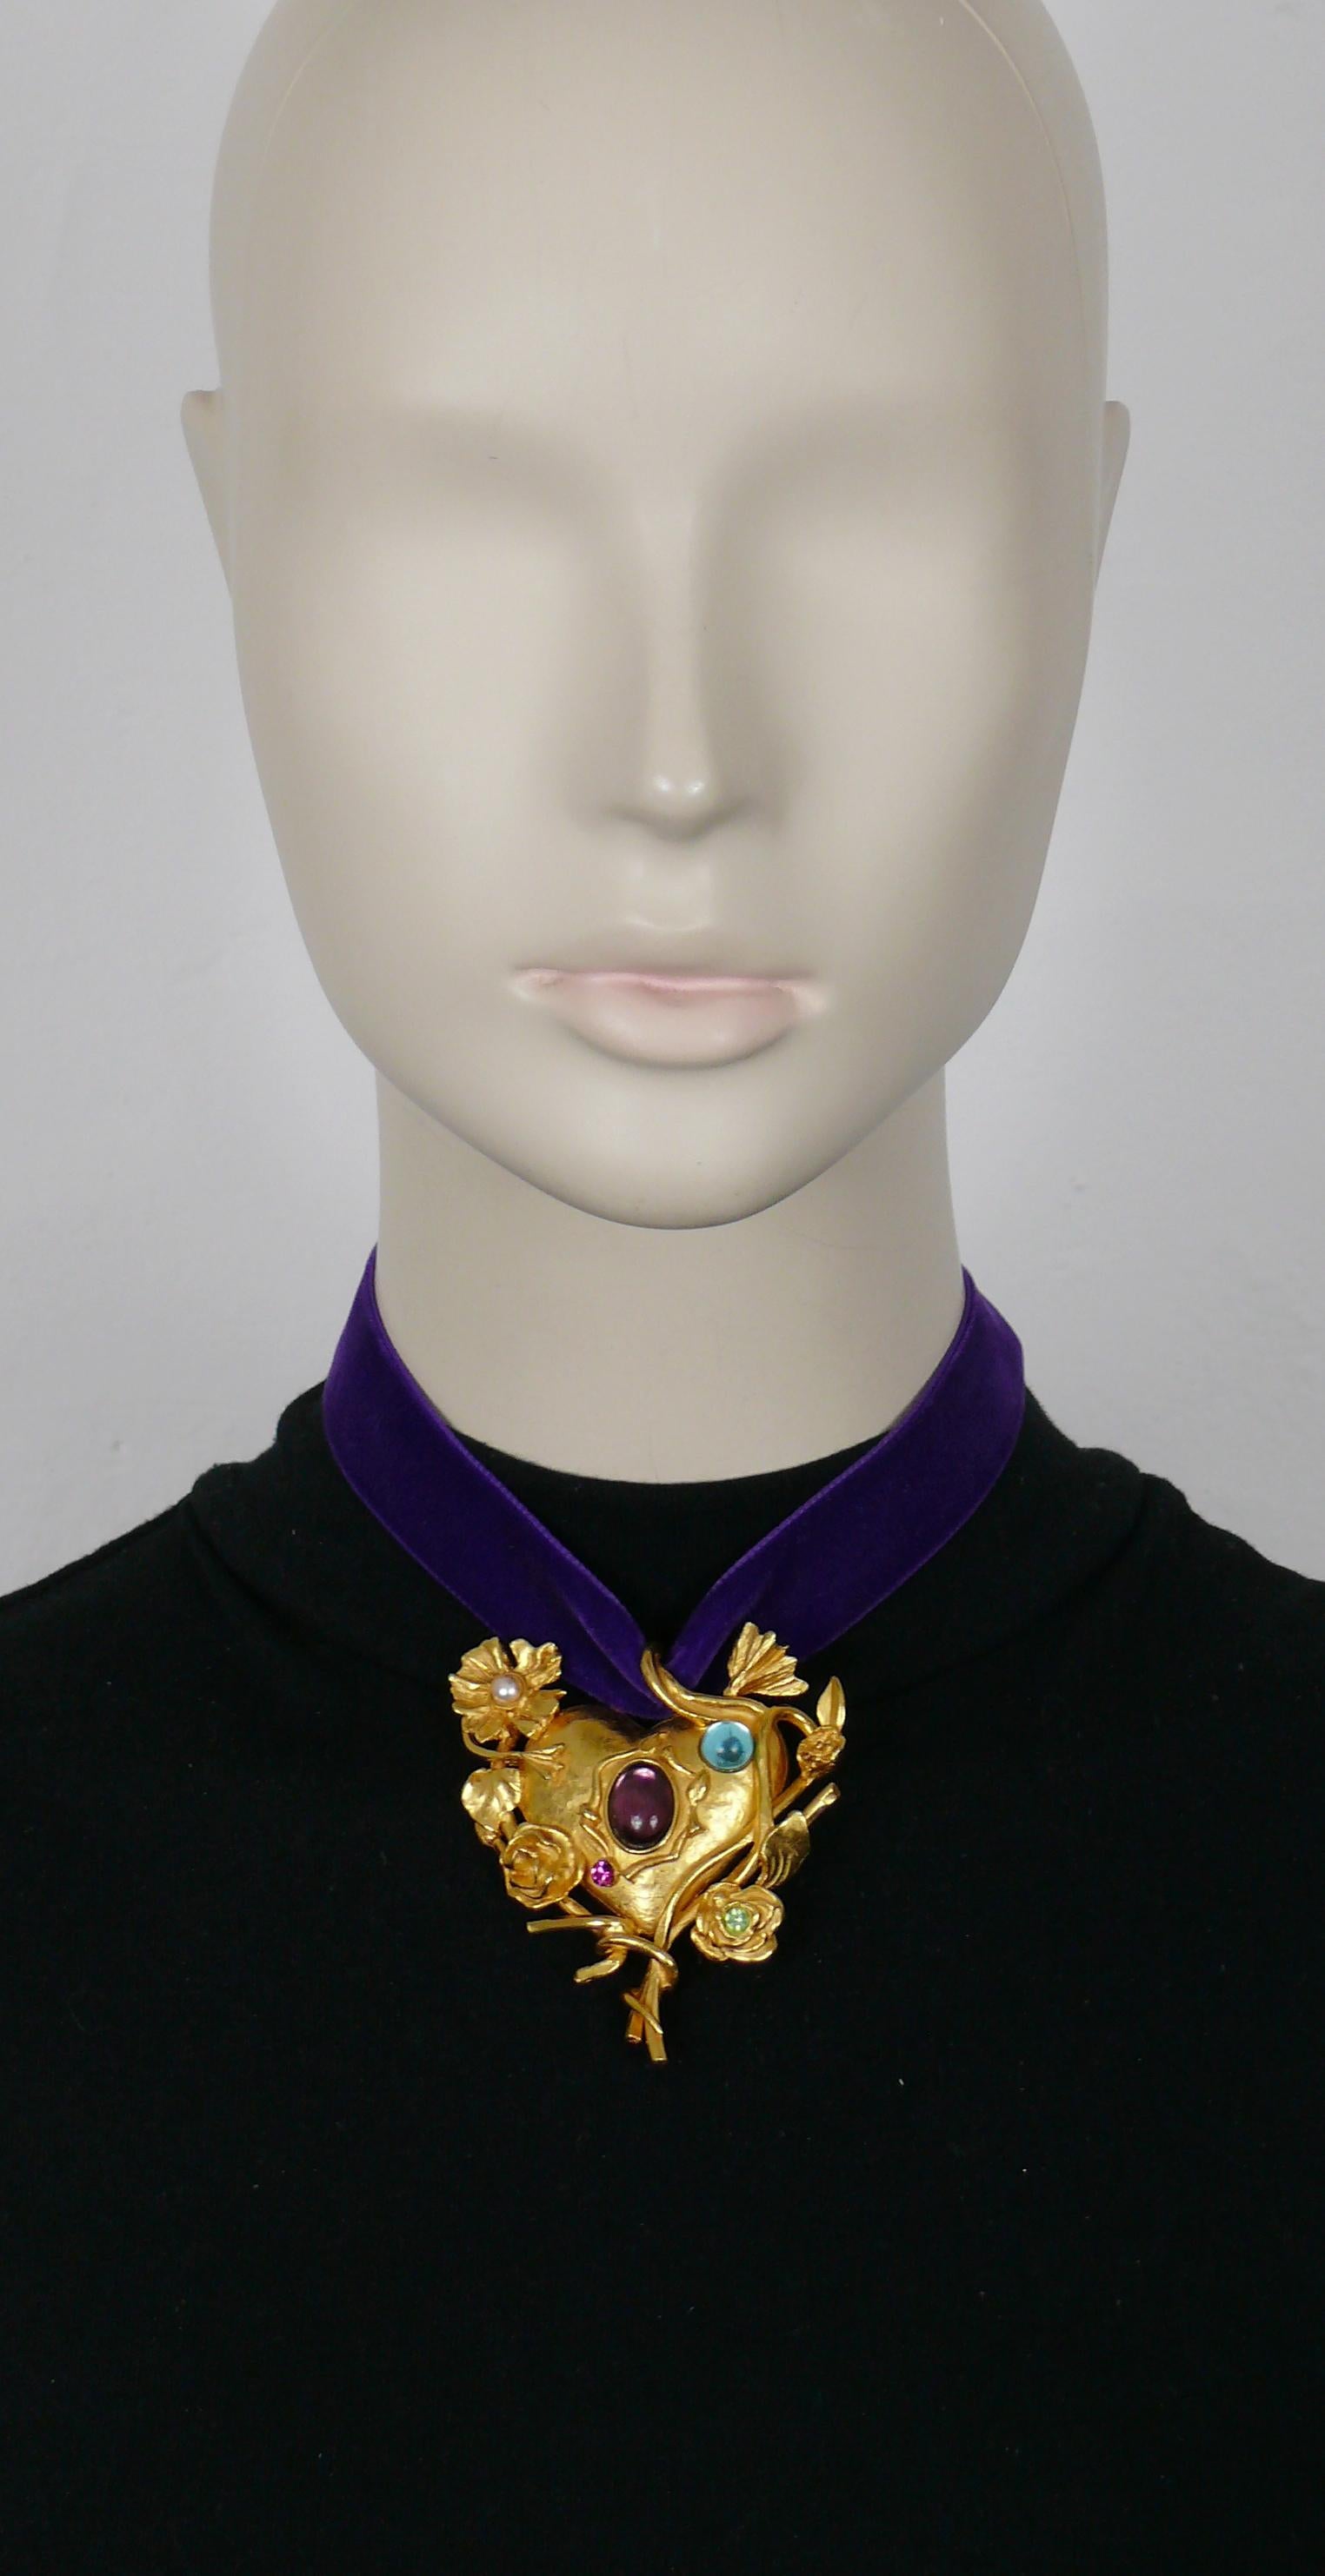 CHRISTIAN LACROIX vintage pendant necklace featuring a jewelled and mirrored floral heart embellished with blue and purple glass cabochons, faux pearl and multicolored crystals. Original purple velvet ribbon (ties at the neck).

Marked CHRISTIAN